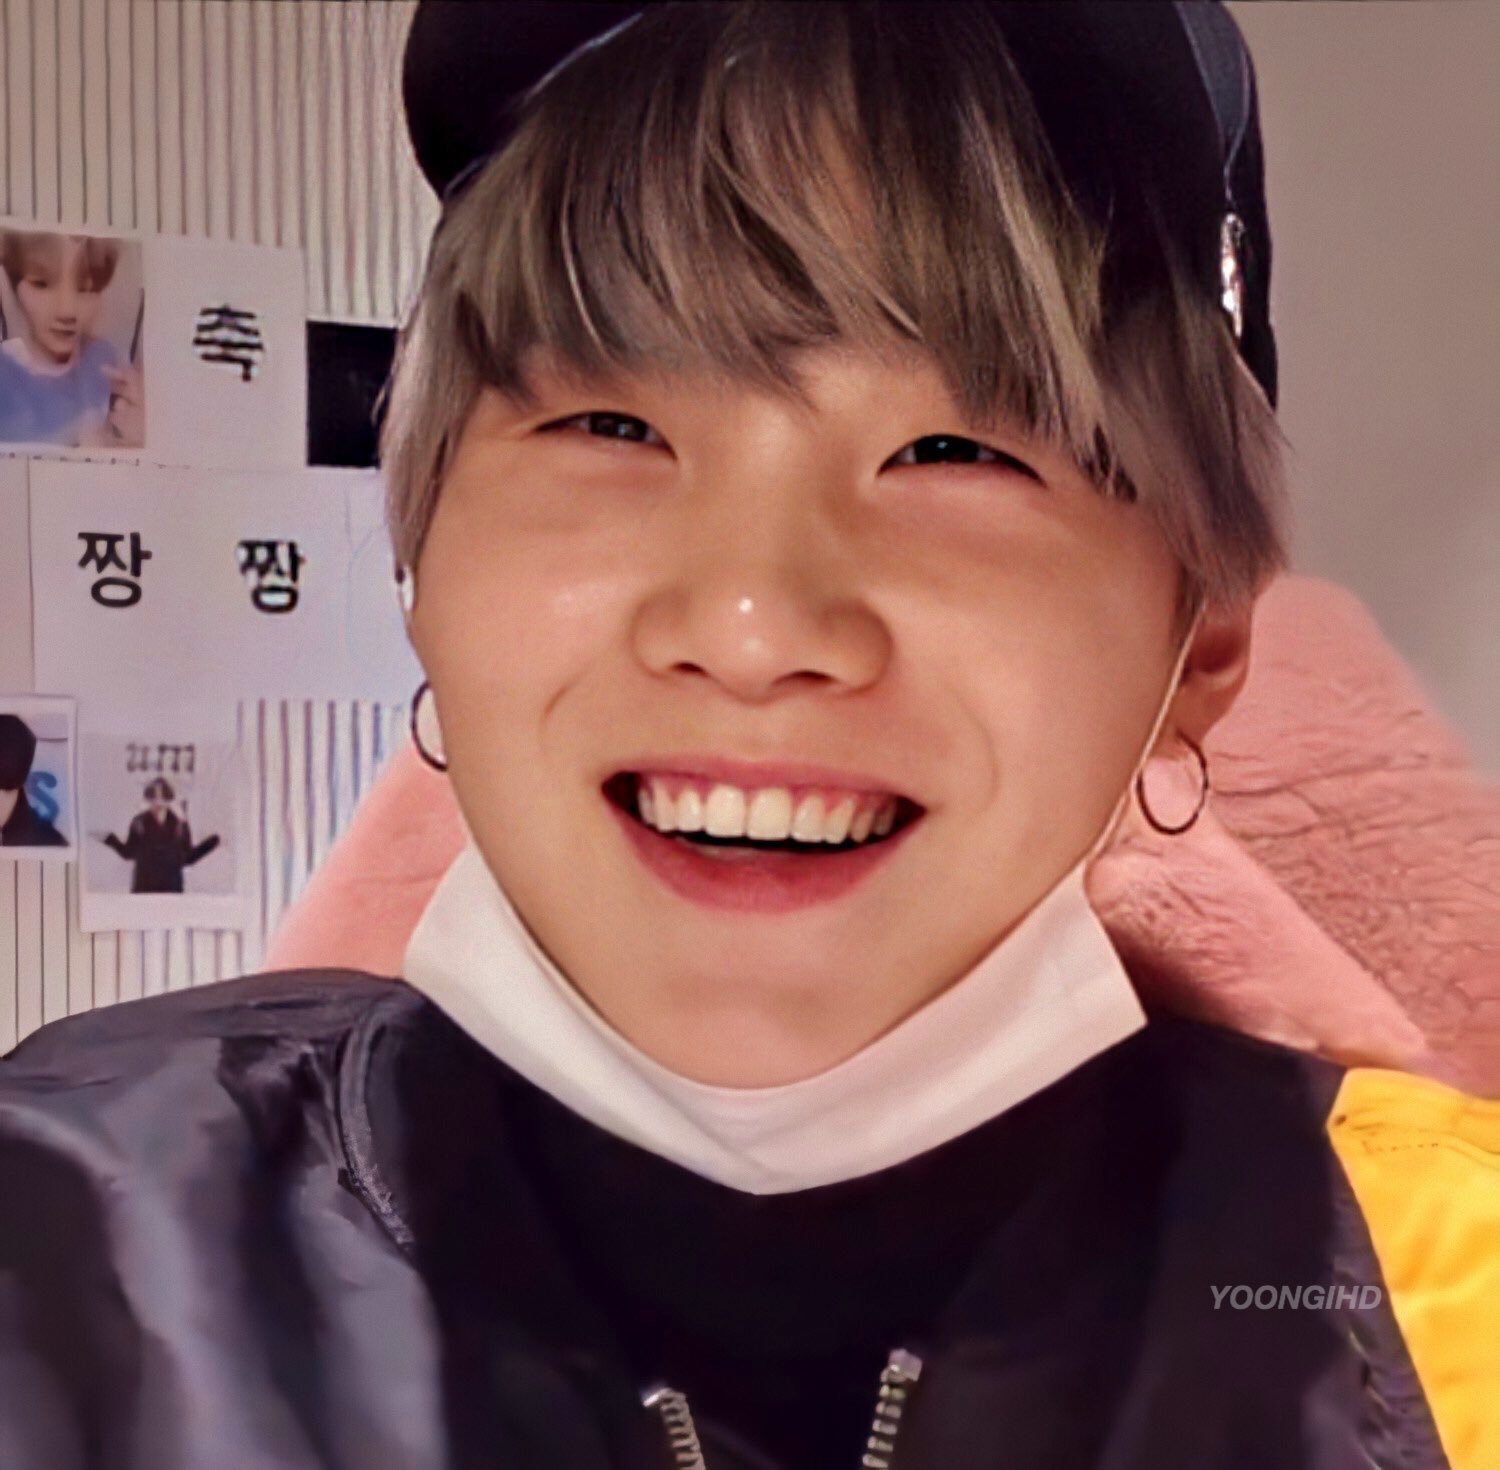 Here Are 10+ Photos Of BTS’s Suga Dazzling You With His Adorable Smile ...